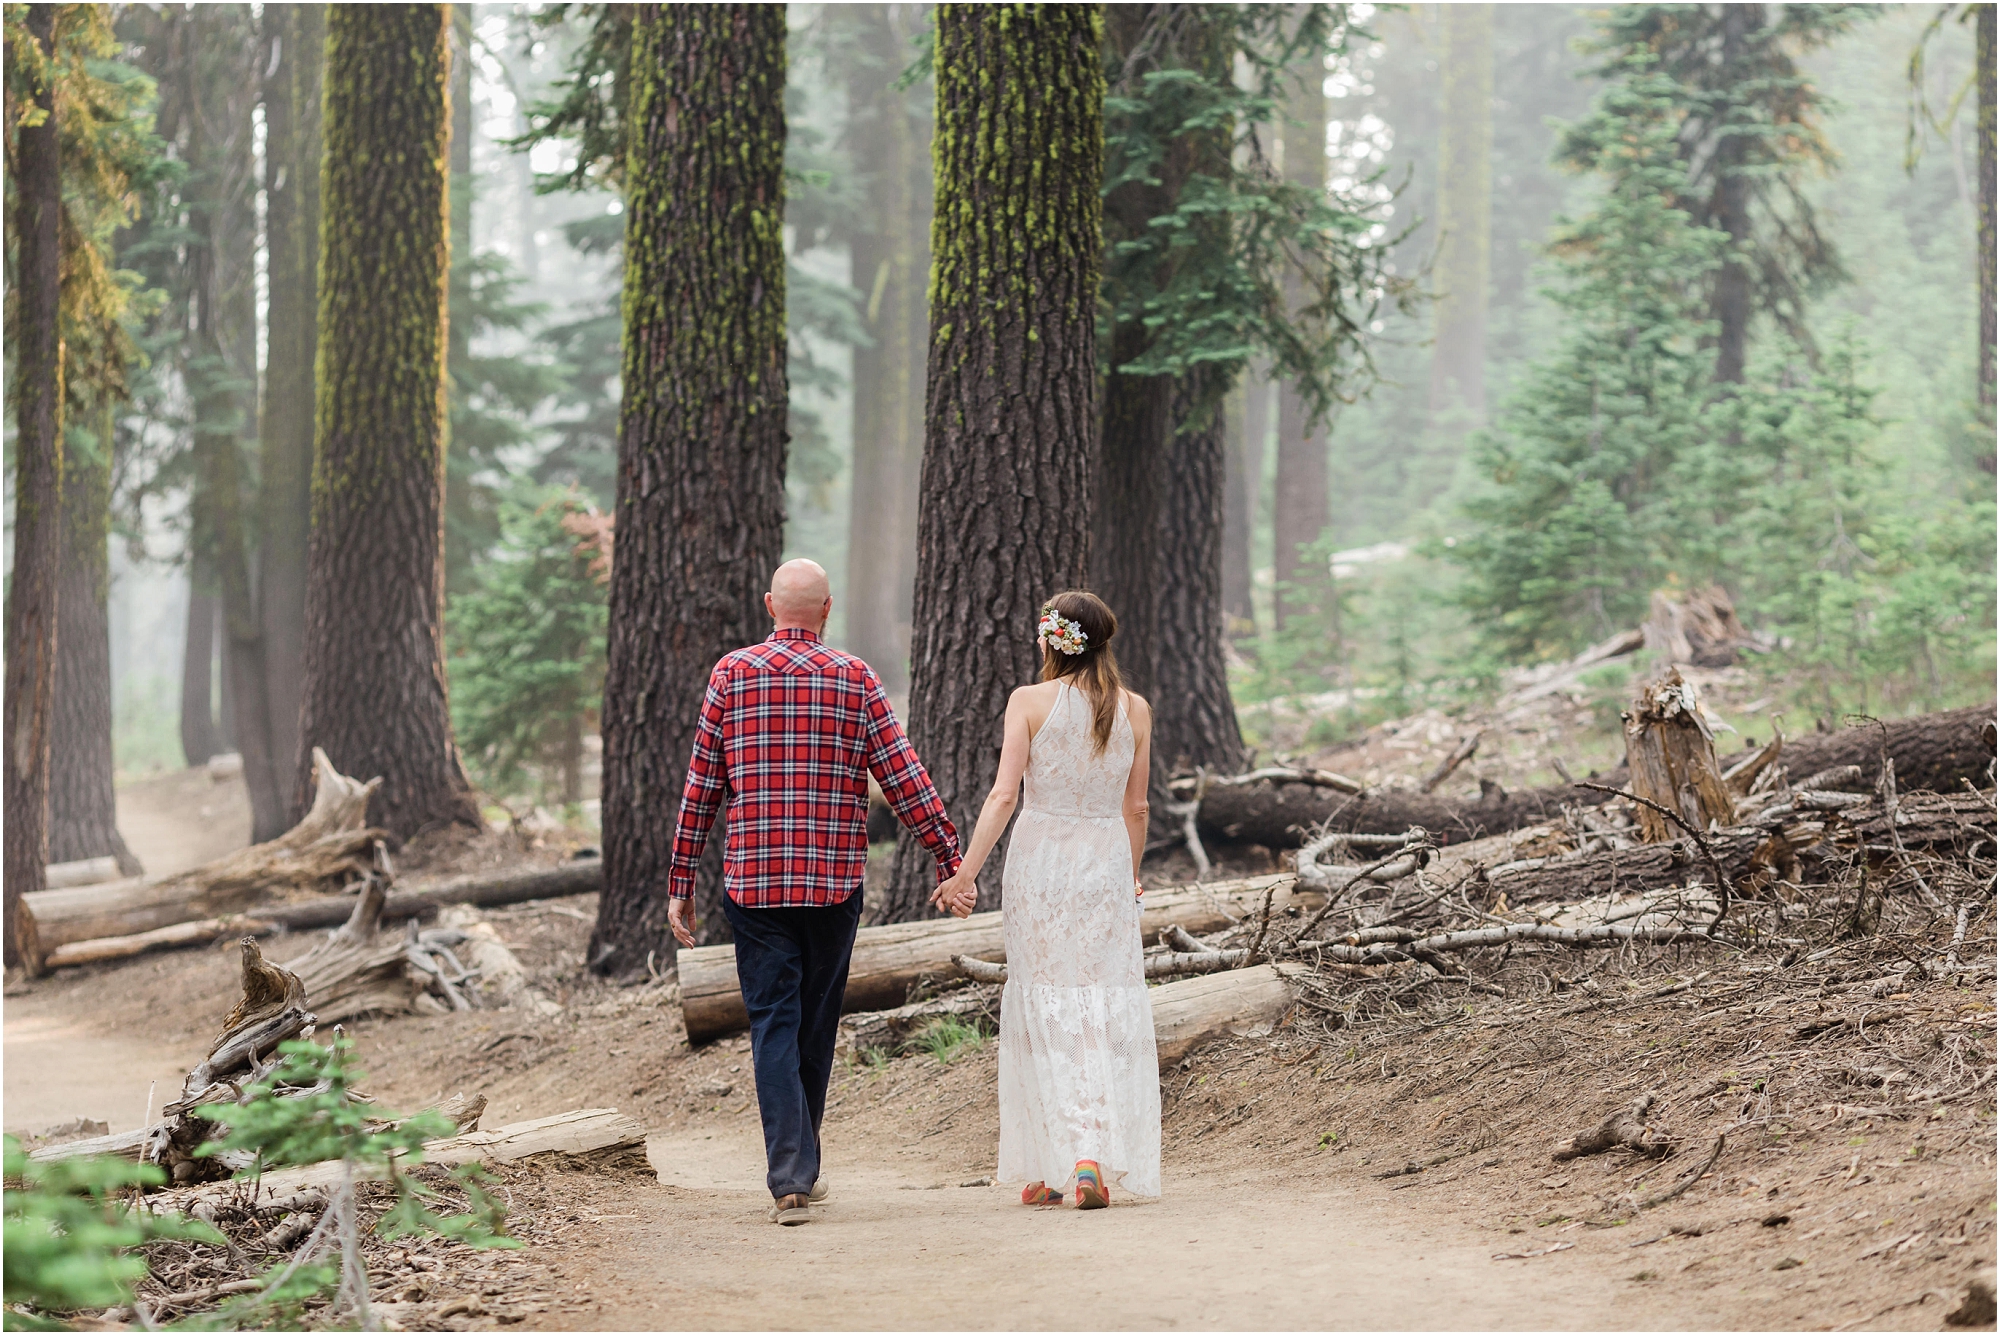 Gorgeous light along the trail as these newlyweds hike after reciting their vows during their adventurous Oregon elopement at Crater Lake. | Erica Swantek Photography